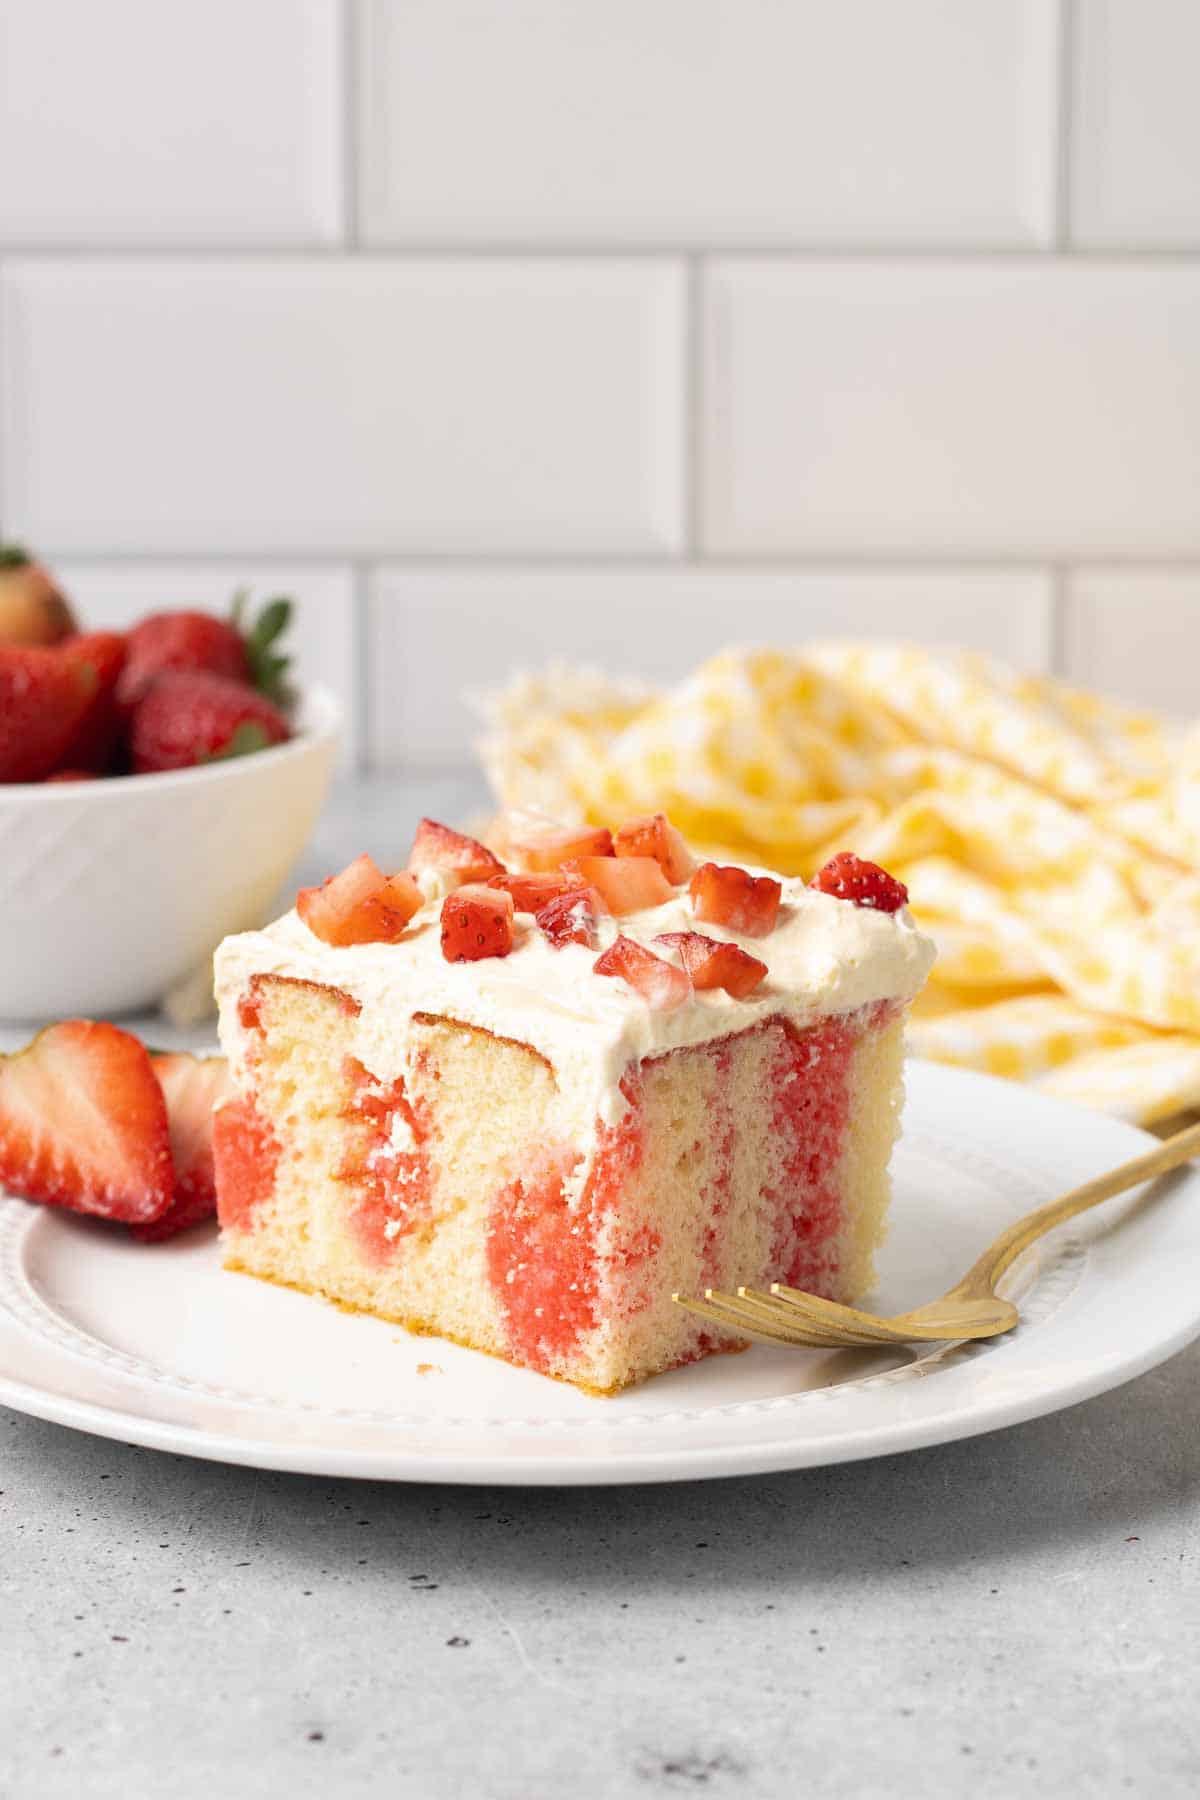 A fork resting on a plate with a slice of jello cake topped with strawberries.